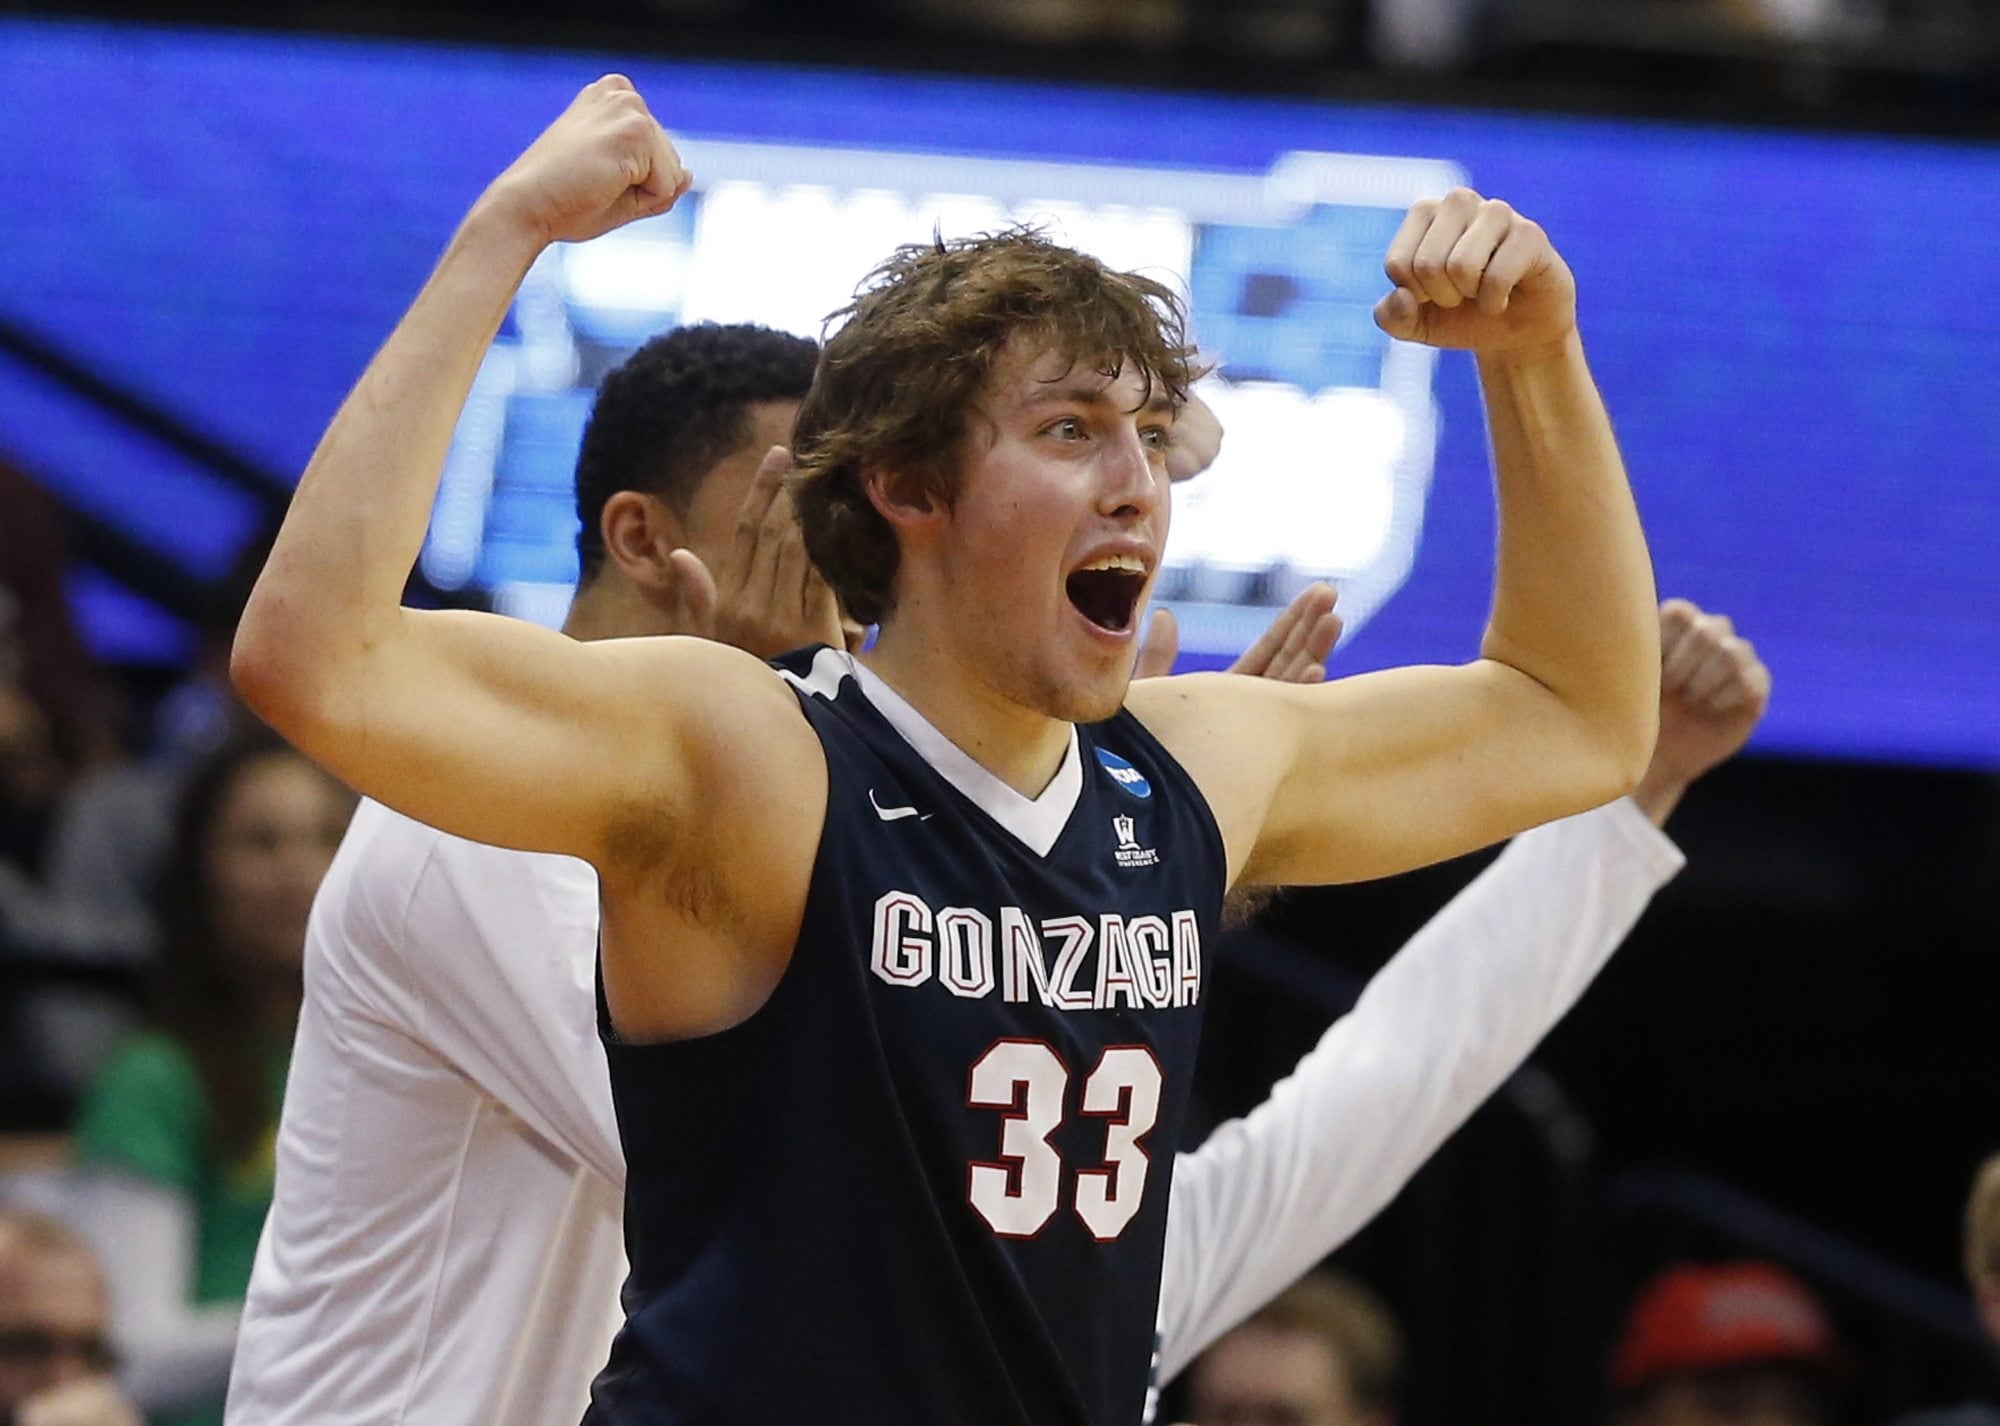 Gonzaga forward Kyle Wiltjer celebrates as times runs out in a second-round men's college basketball game against Utah on Saturday, March 19, 2016, in the NCAA Tournament in Denver. Gonzaga won 82-59.